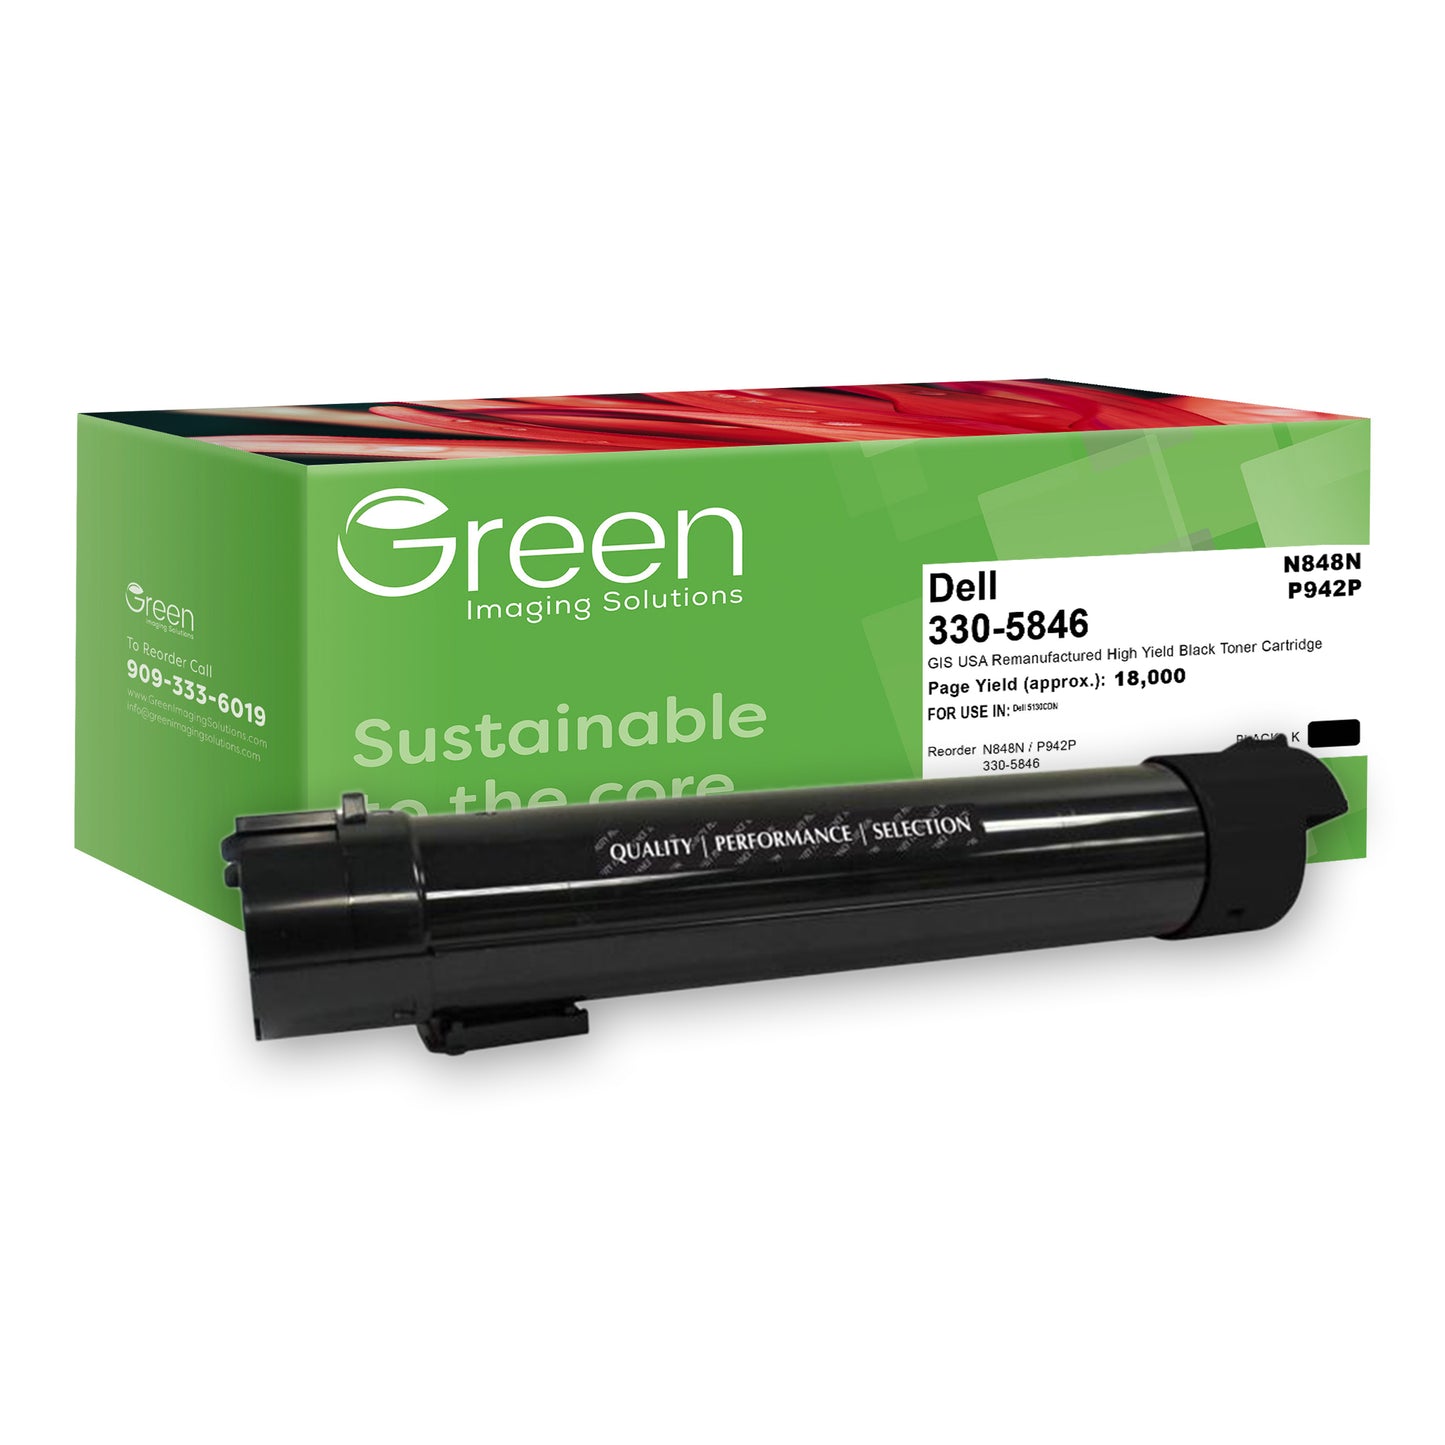 Green Imaging Solutions USA Remanufactured High Yield Black Toner Cartridge for Dell 5130